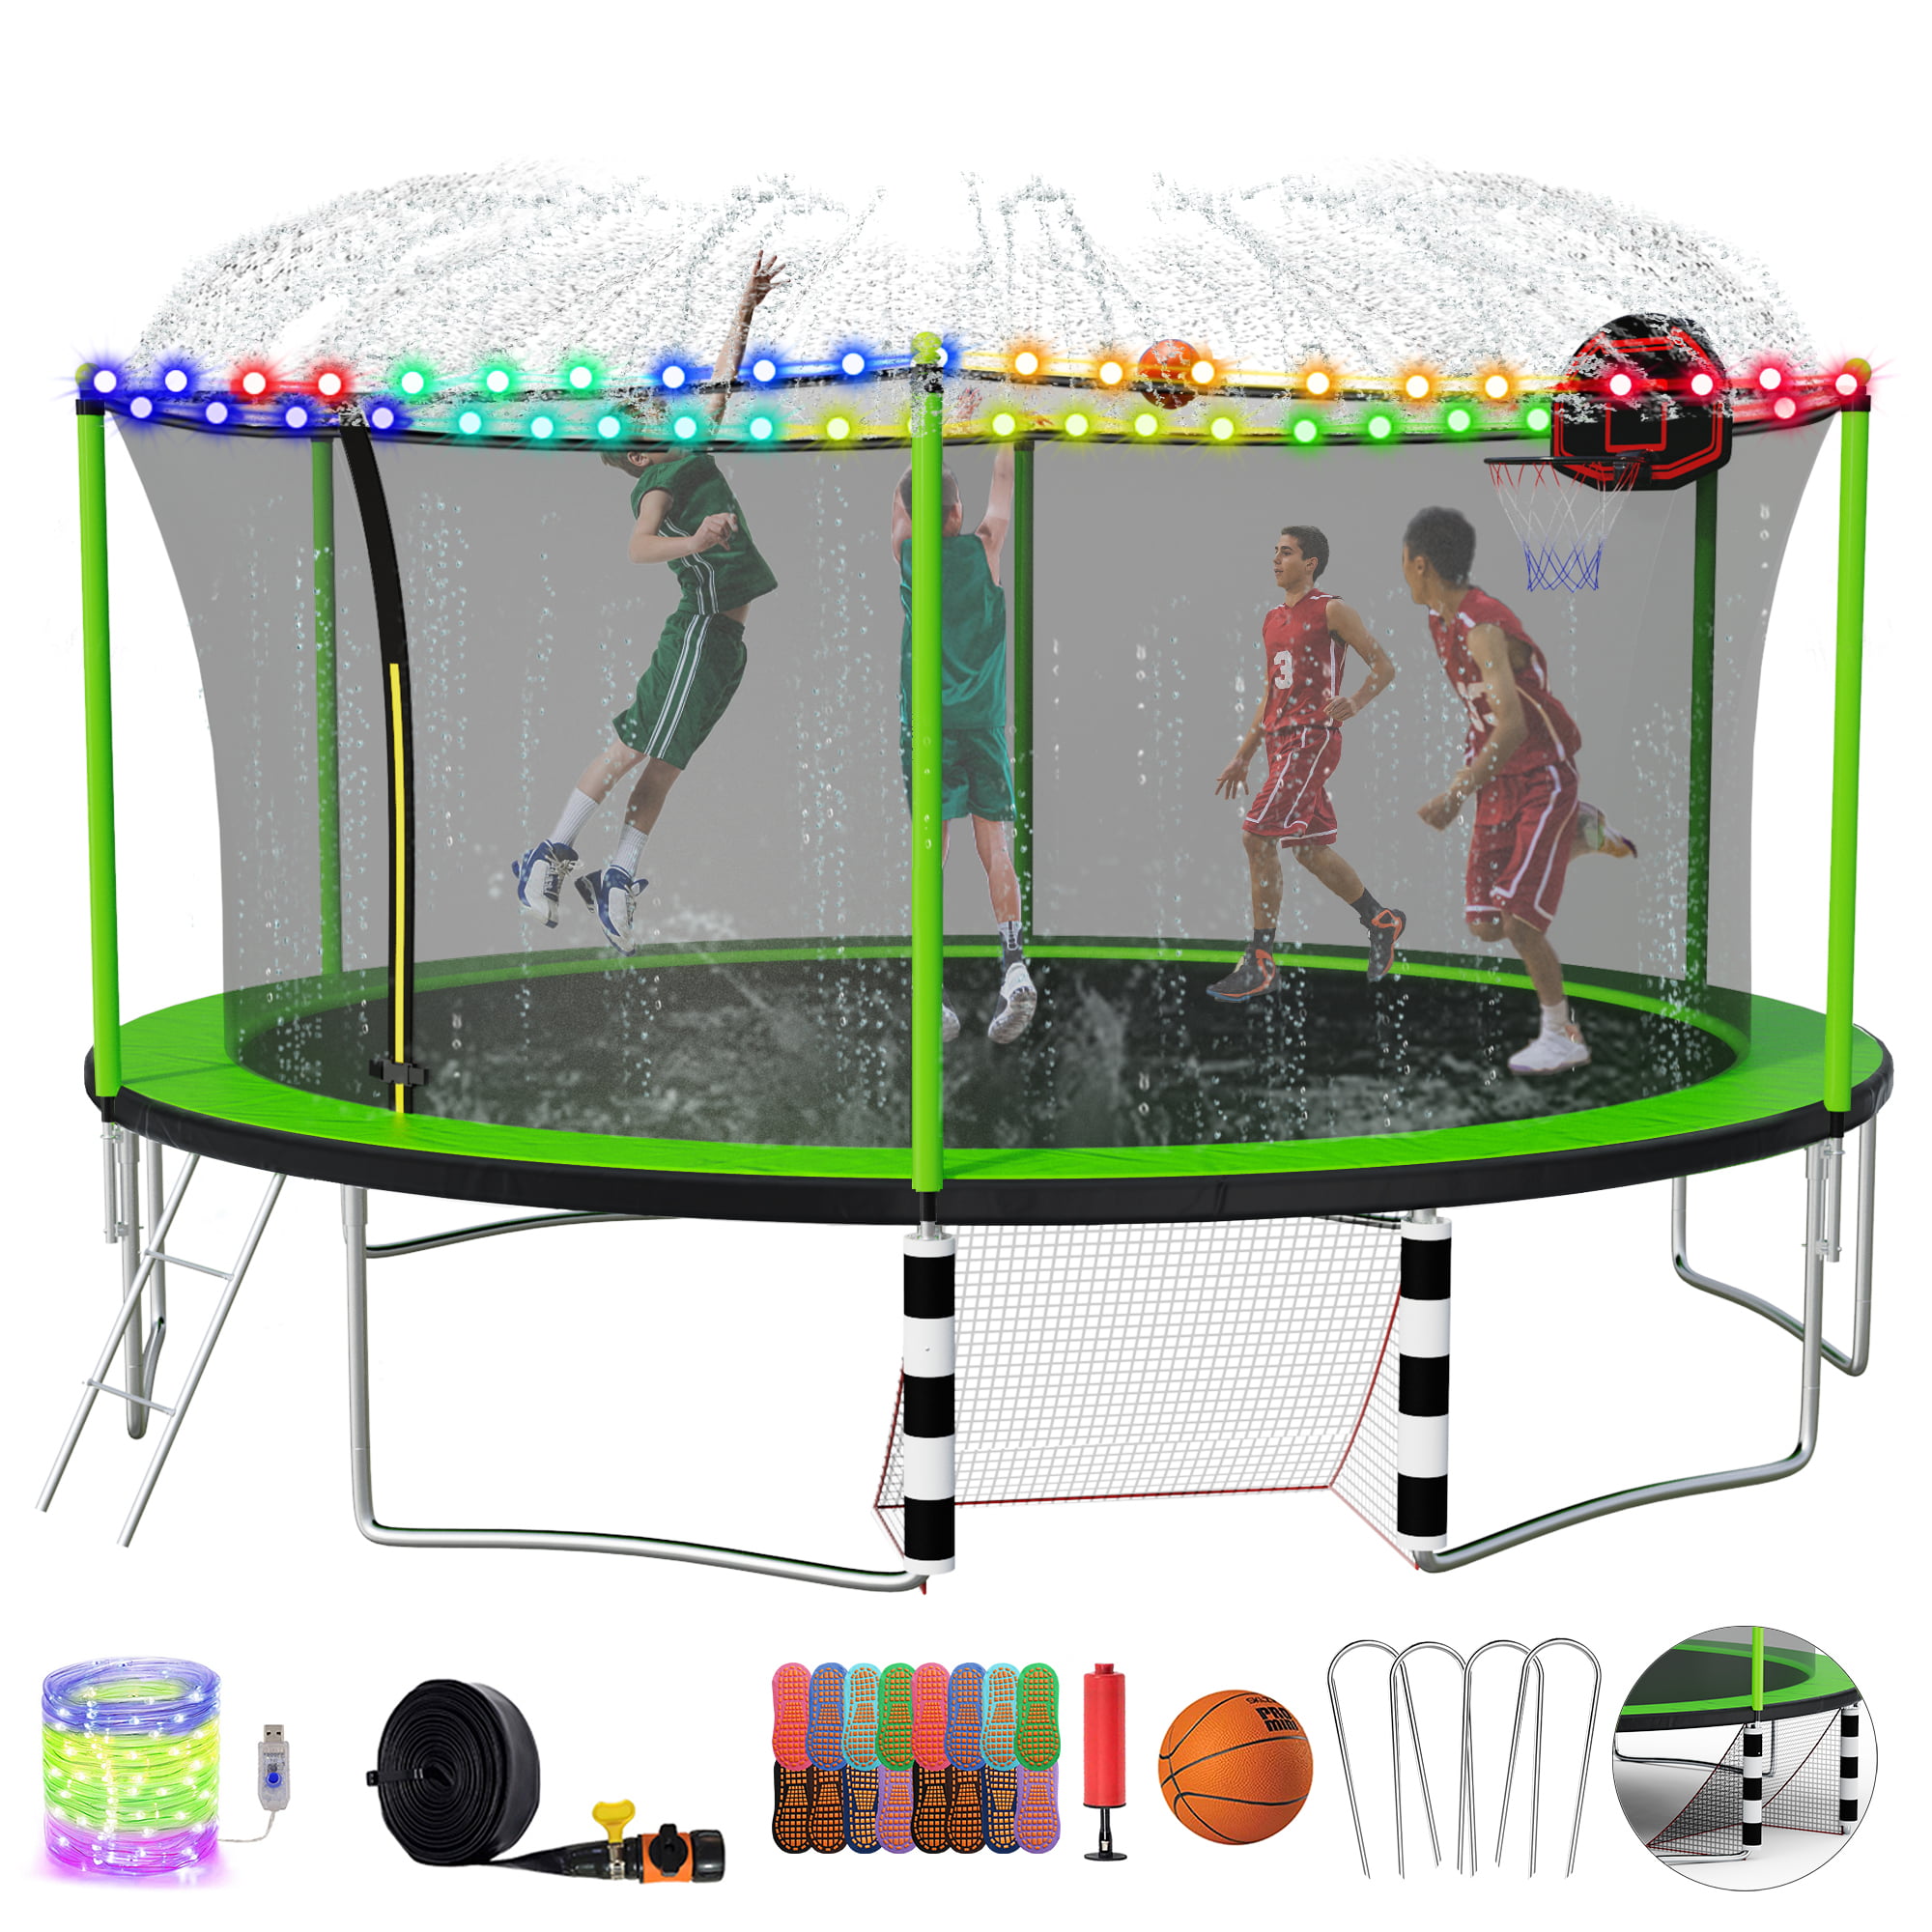 Basketball Hoop Ladder Elitezip 1200 LBS 12FT 15FT Tranpoline for Kids &Adults Capacity for 6-8 Kids【ASTM CPC CPSIA Approved】 Outdoor Recreational Family Backyard Tranpoline with Enclosure Net 